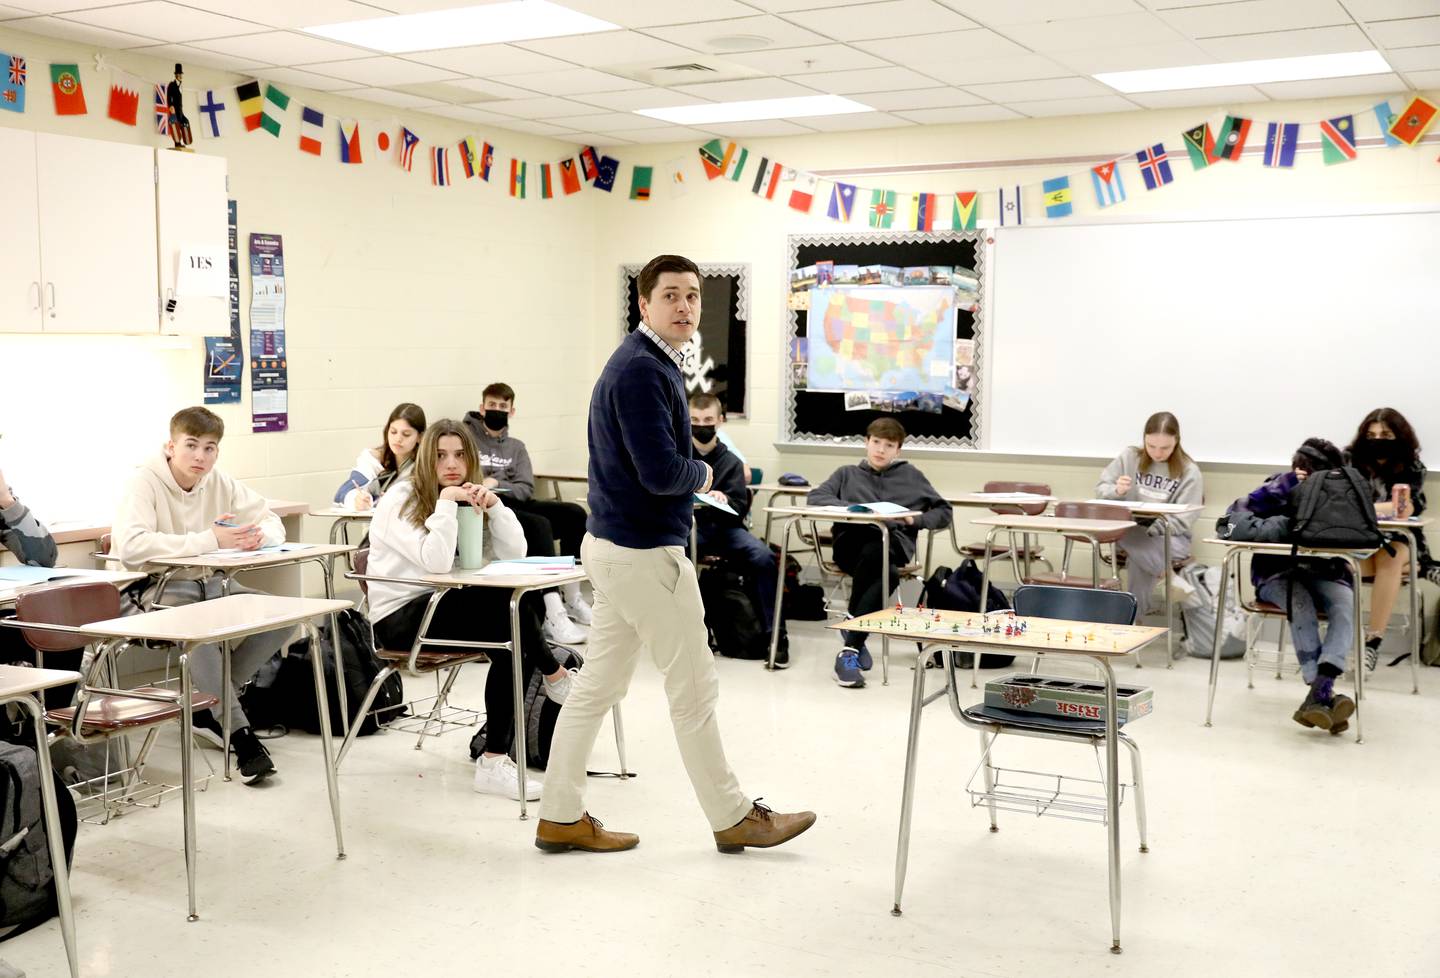 Downers Grove North social studies teacher Dennis Rogala teaches a freshman class at the school. Rogala recently received his National Board Certification from the National Board for Professional Teaching Standards.